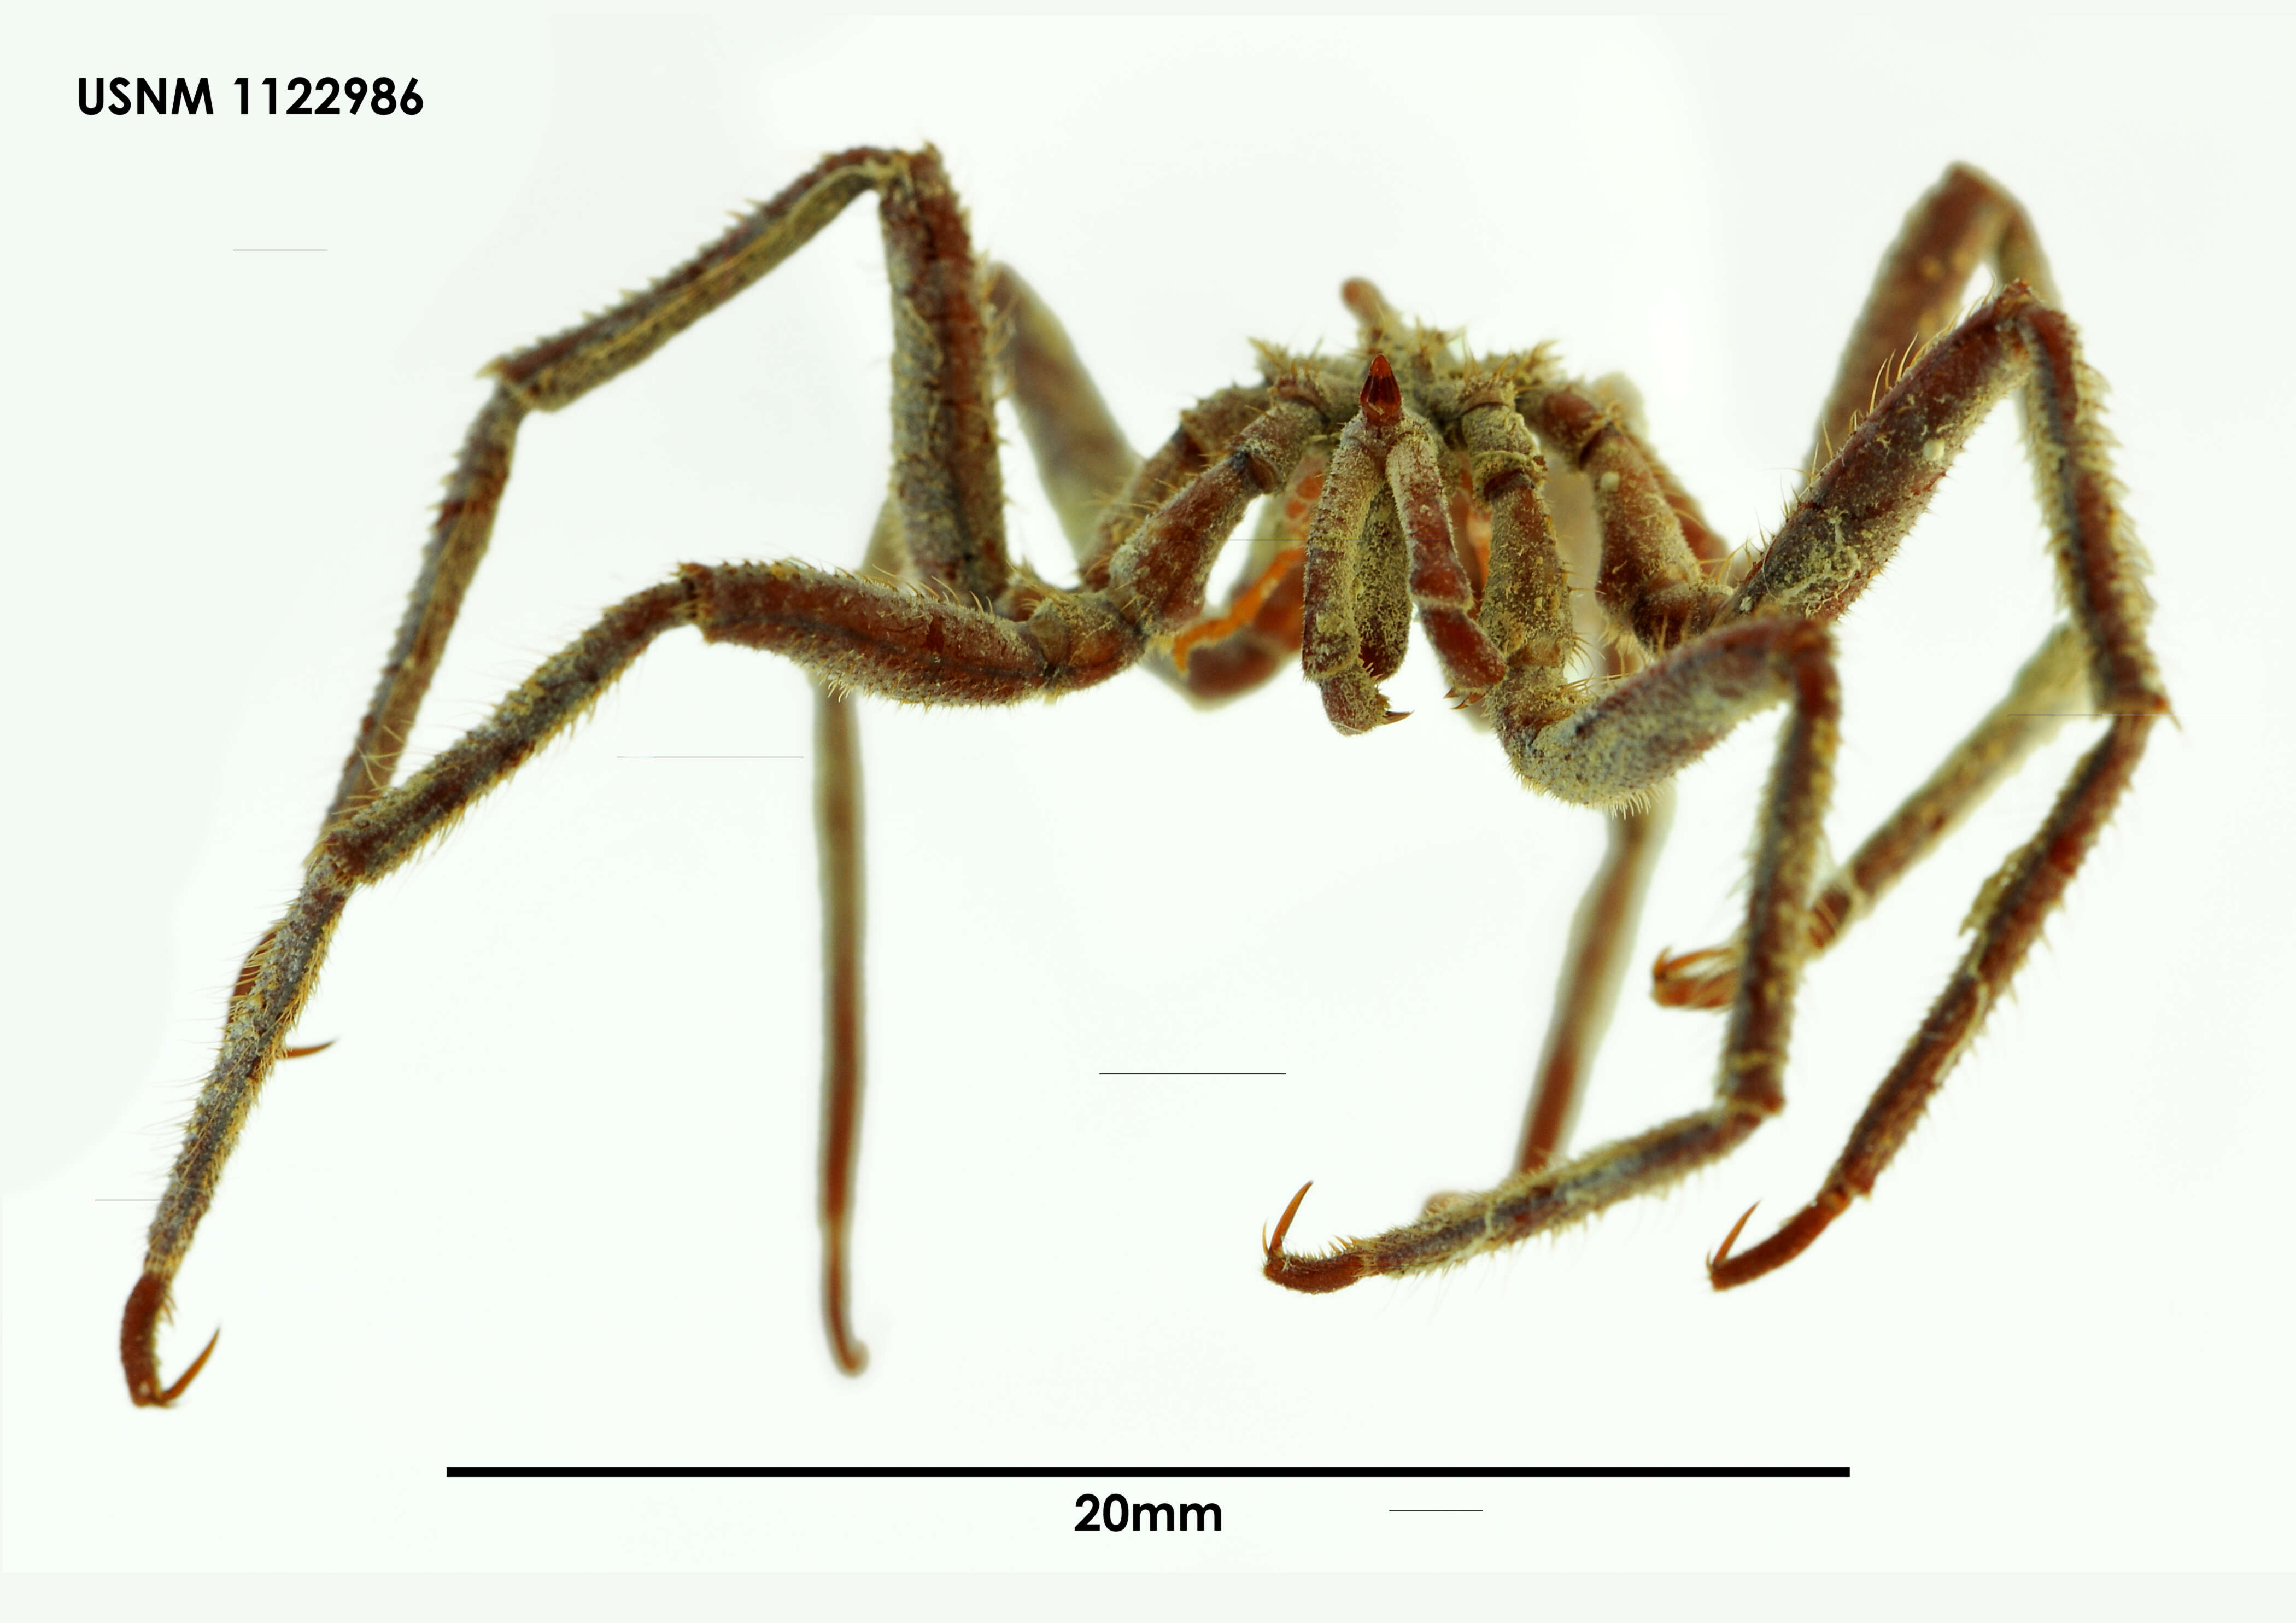 Image of spiders